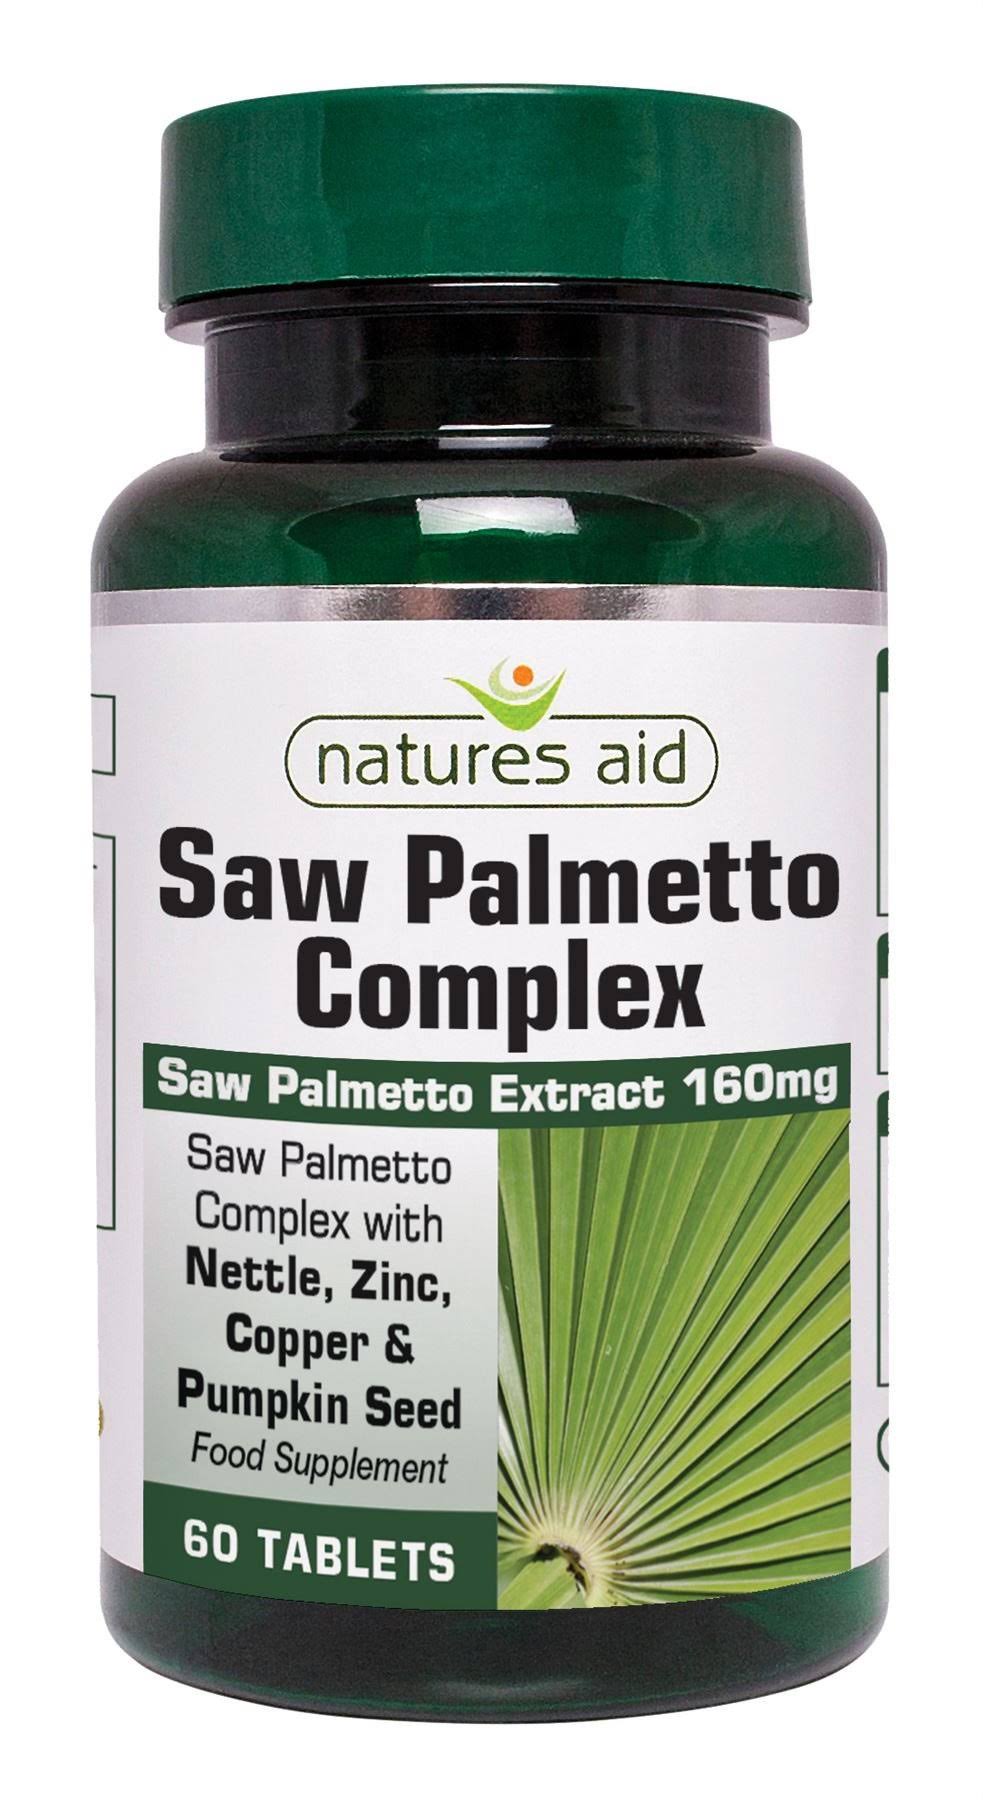 Natures Aid Saw Palmetto Complex for Men Supplement - 60 Tablets